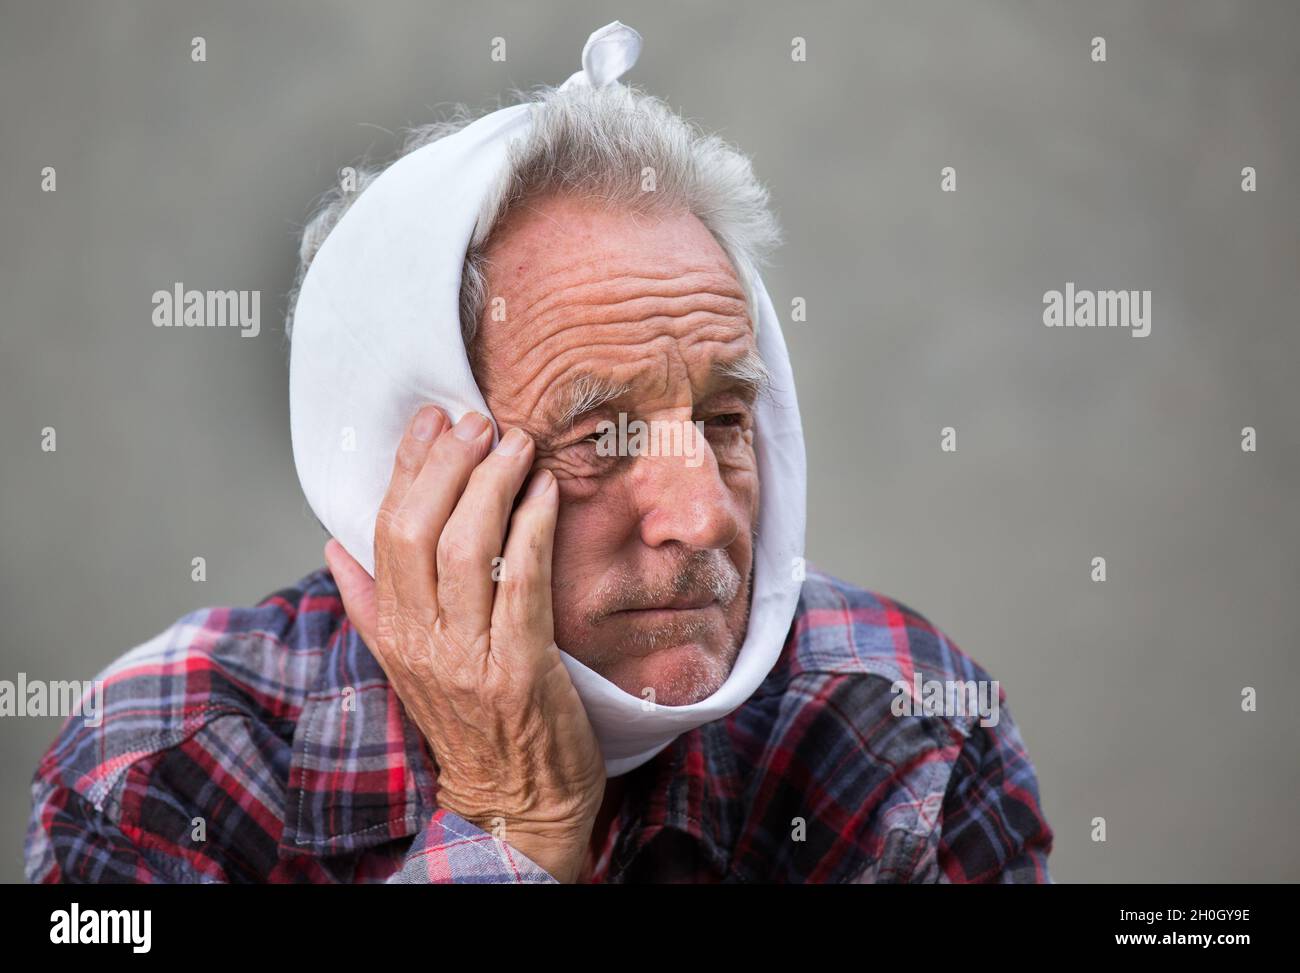 Old man having toothache, binding head with cold cloth Stock Photo